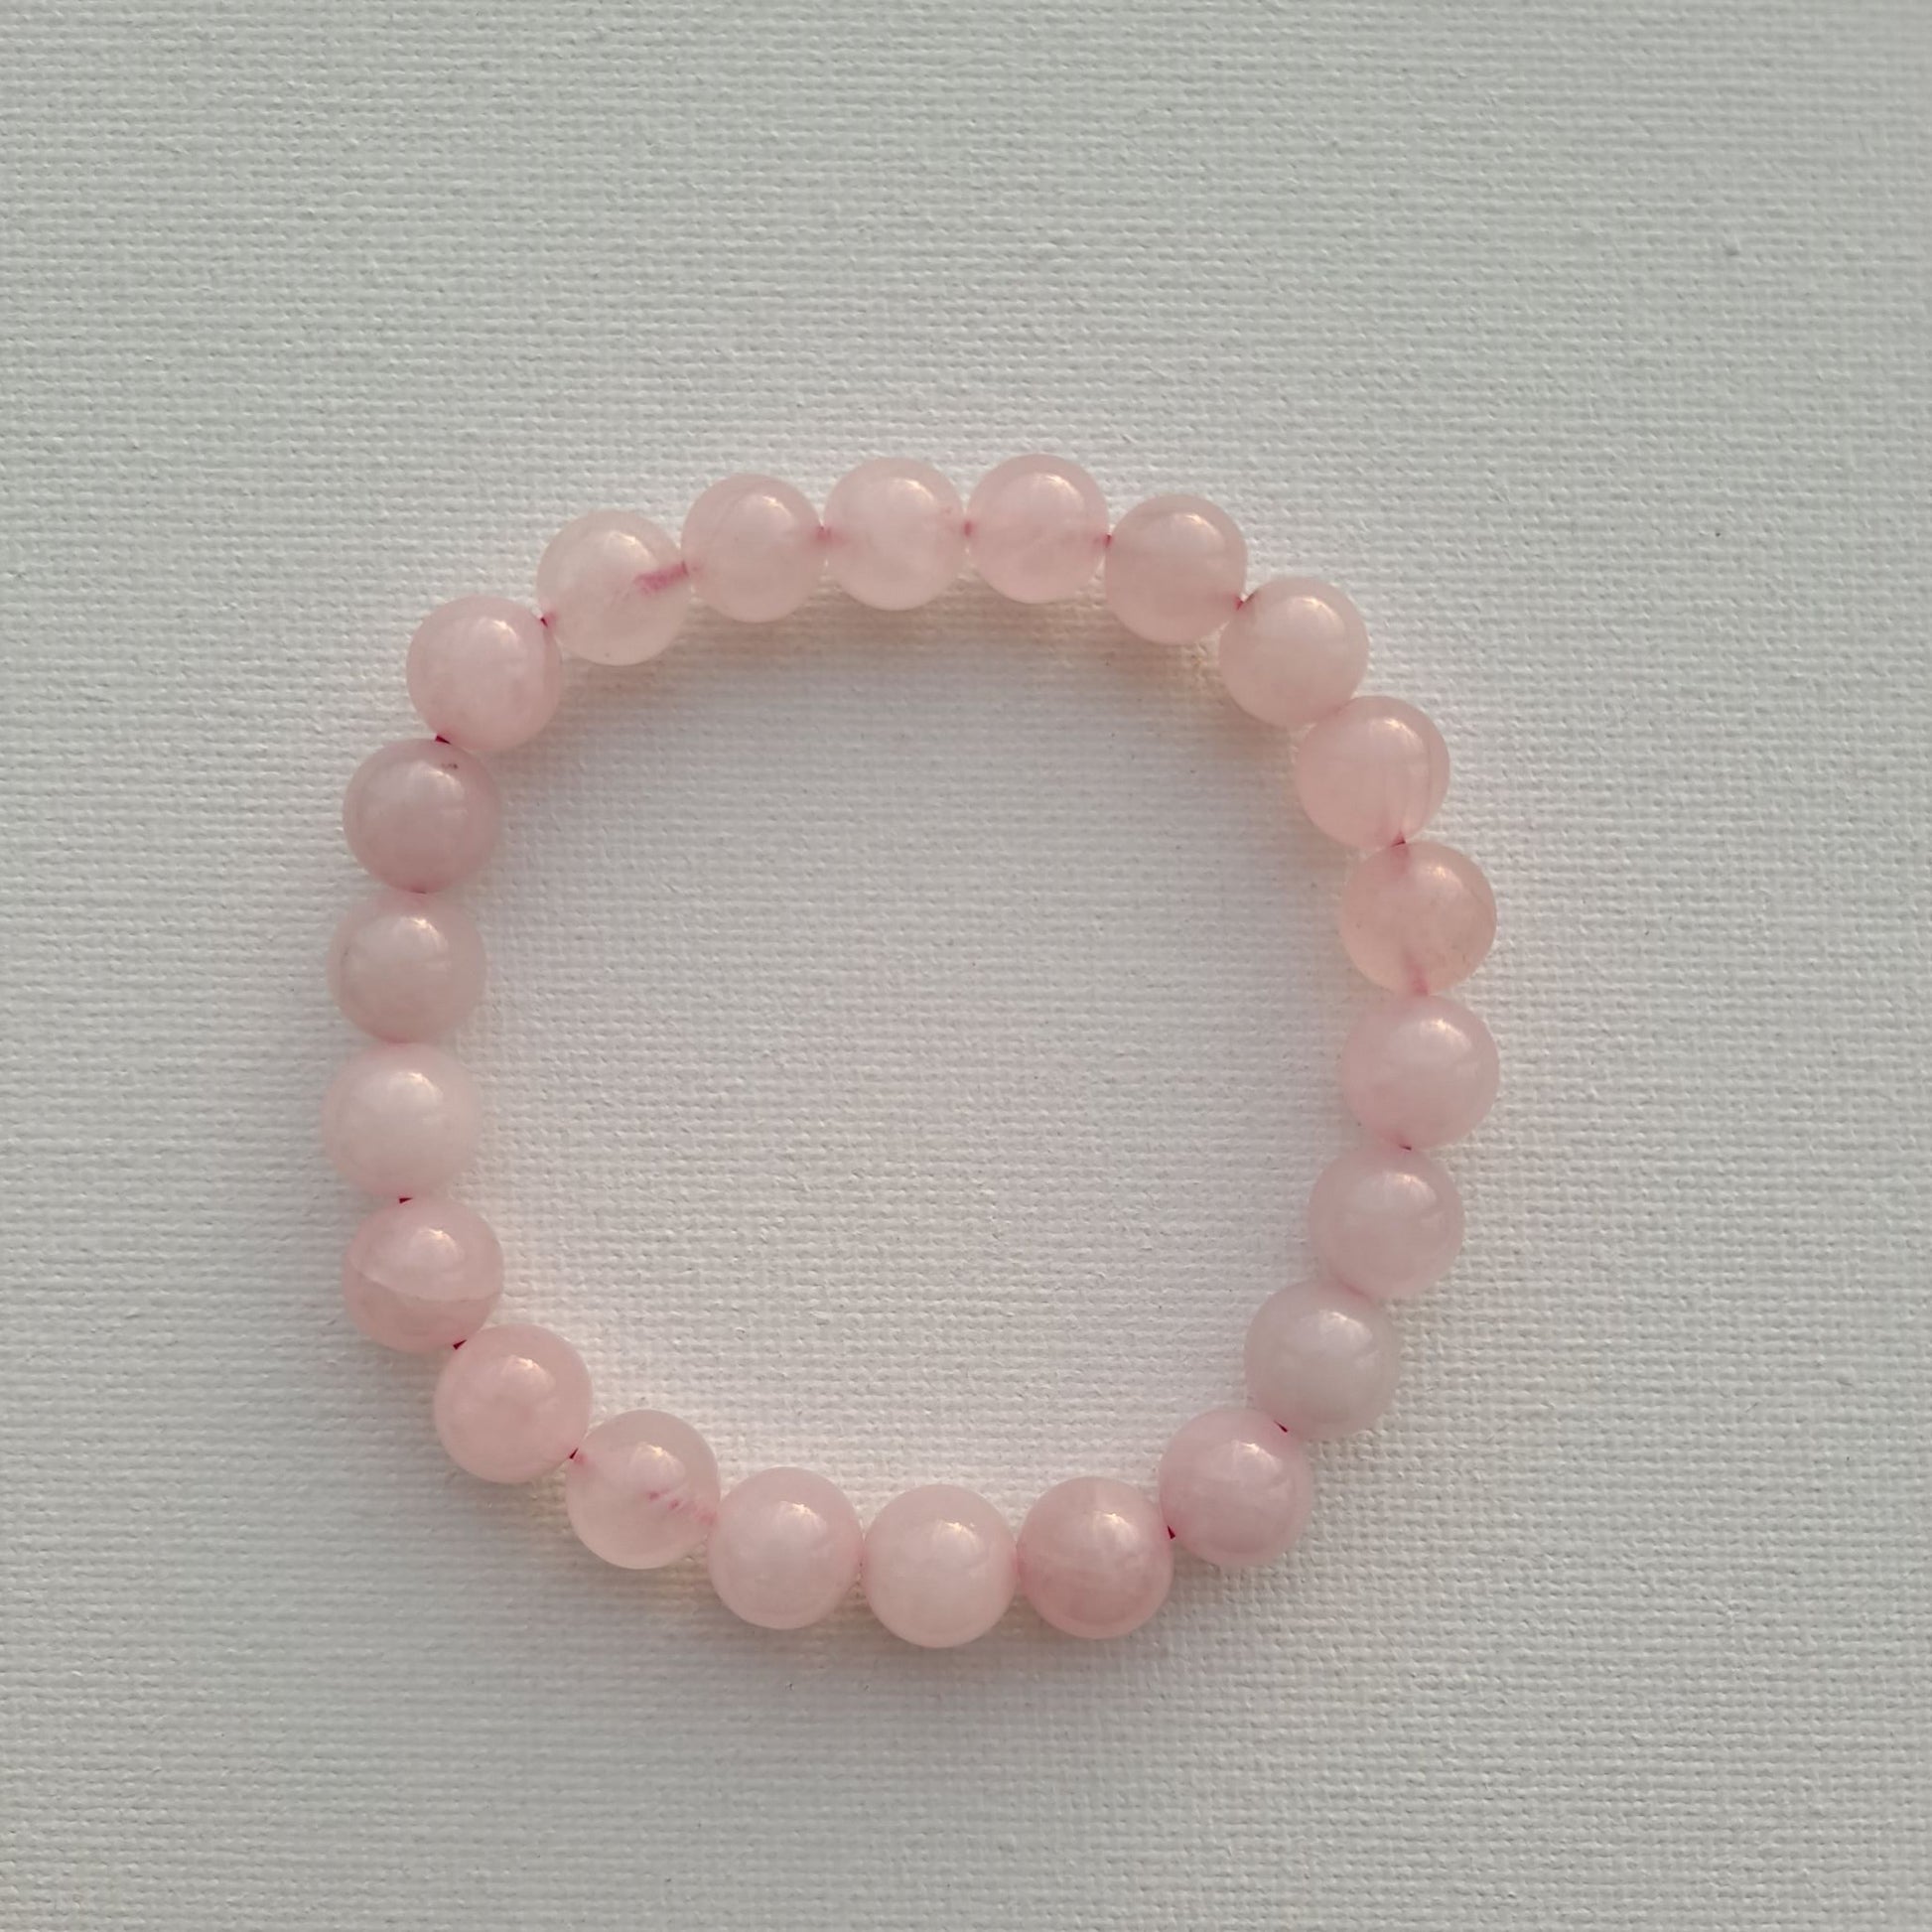 Dumi's Crystals | 8mm Rose Quartz Stretch Bracelet (7 Inch) | Close-up of a handcrafted bracelet featuring genuine 8mm Rose Quartz beads in rich pink hues. Rose Quartz is known as the stone of unconditional love and is believed to promote emotional healing and self-love.